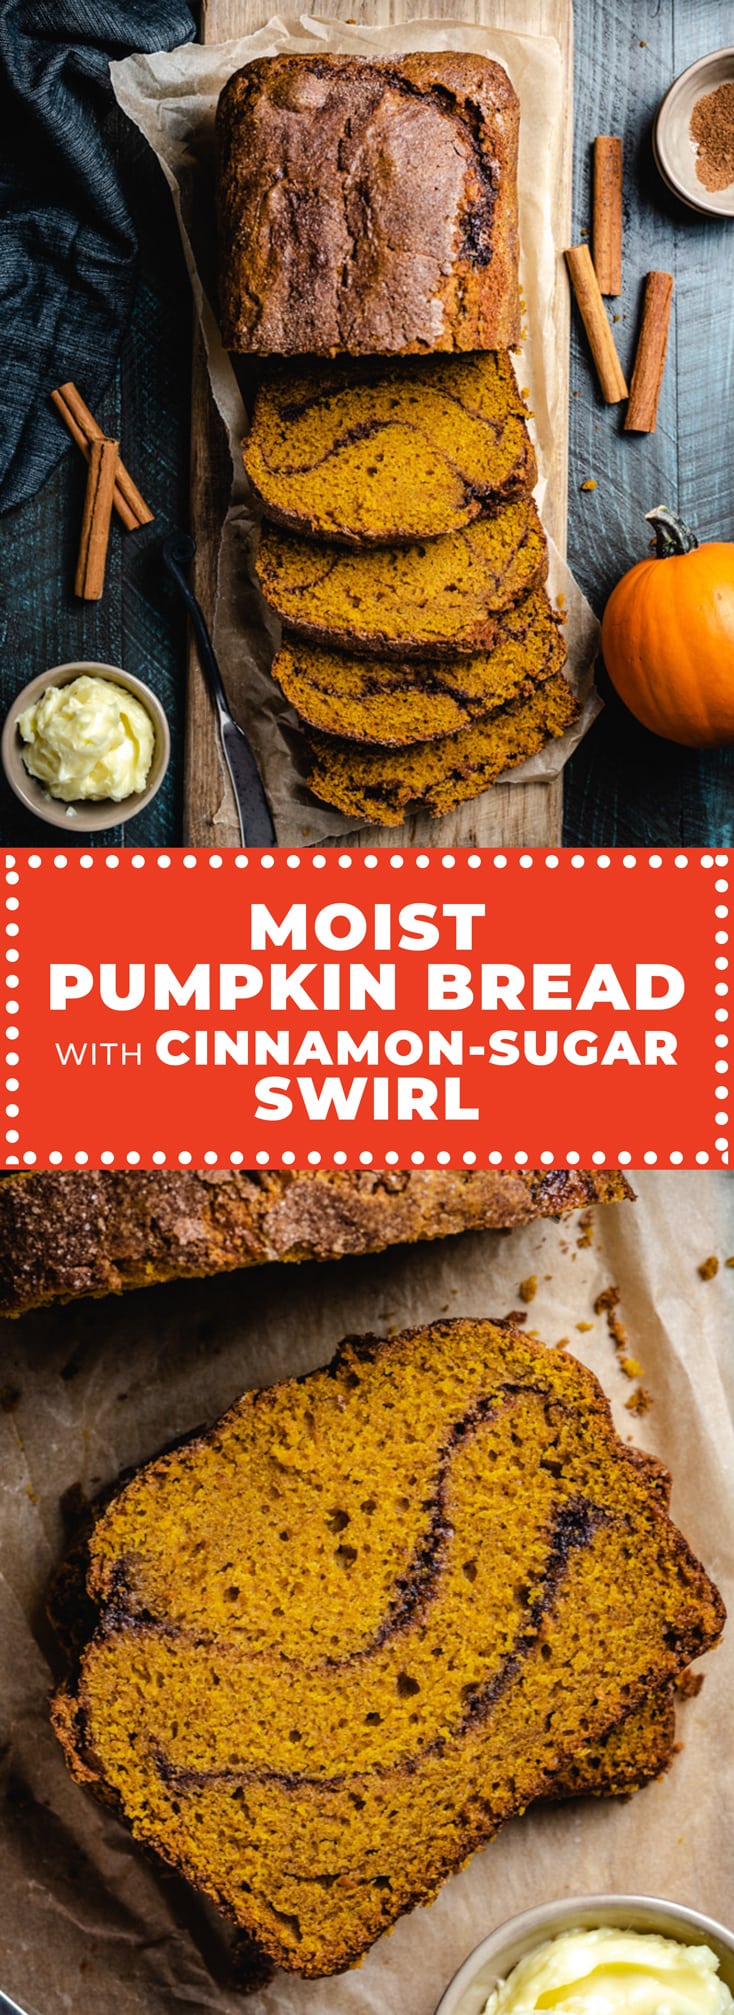 This easy recipe produces a moist, fluffy, and flavorful pumpkin bread with ribbons of cinnamon sugar inside and a crisp, craggly cinnamon crust.  | hostthetoast.com